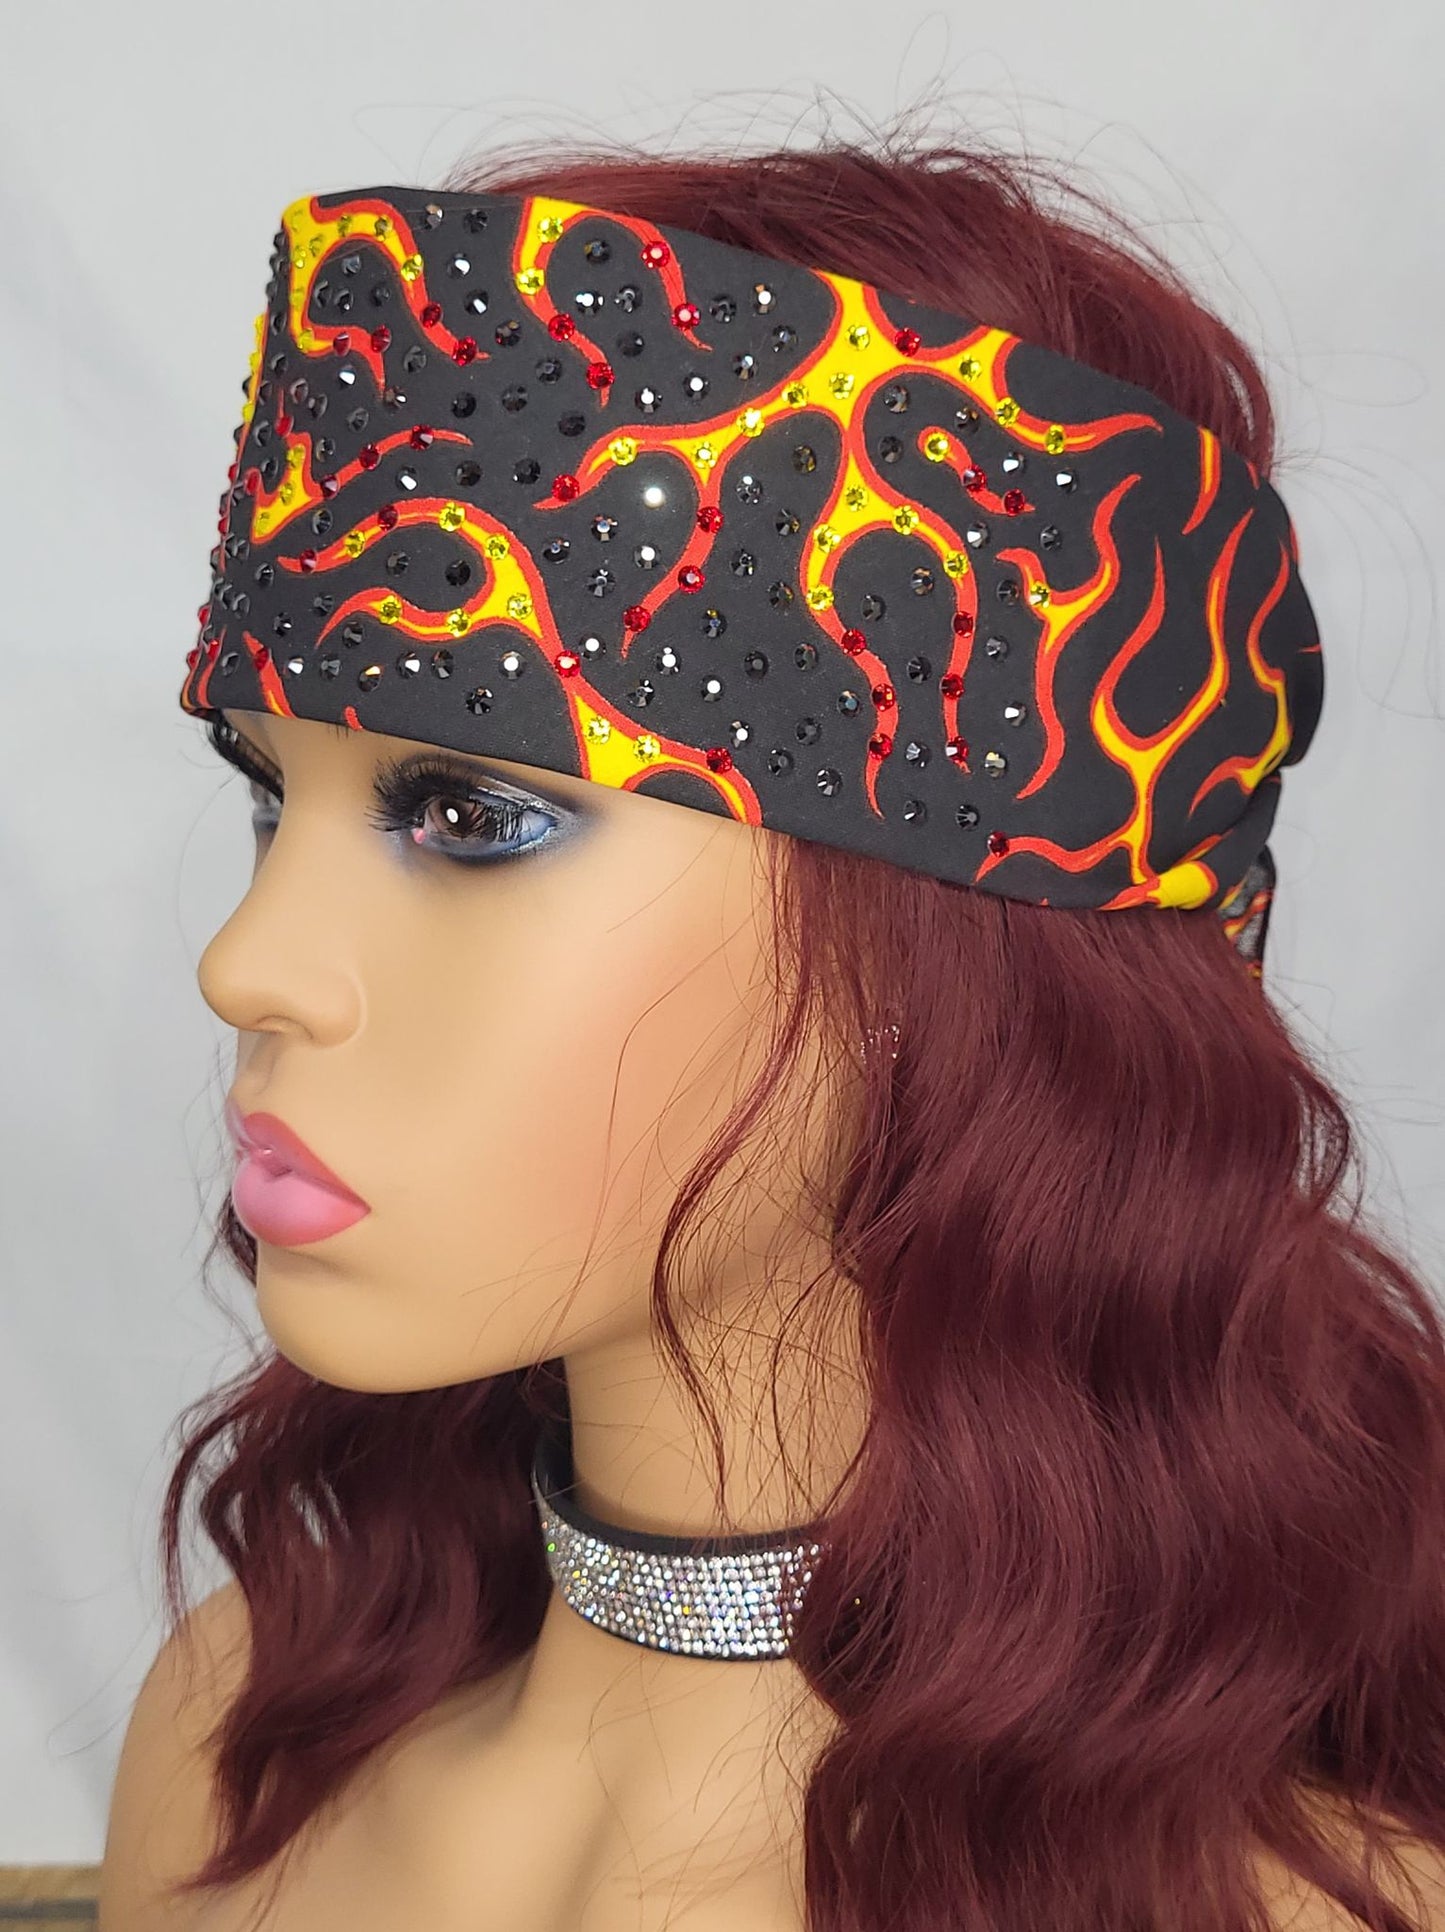 LeeAnnette Flames with Black, Red and Yellow Austrian Crystals (4991)